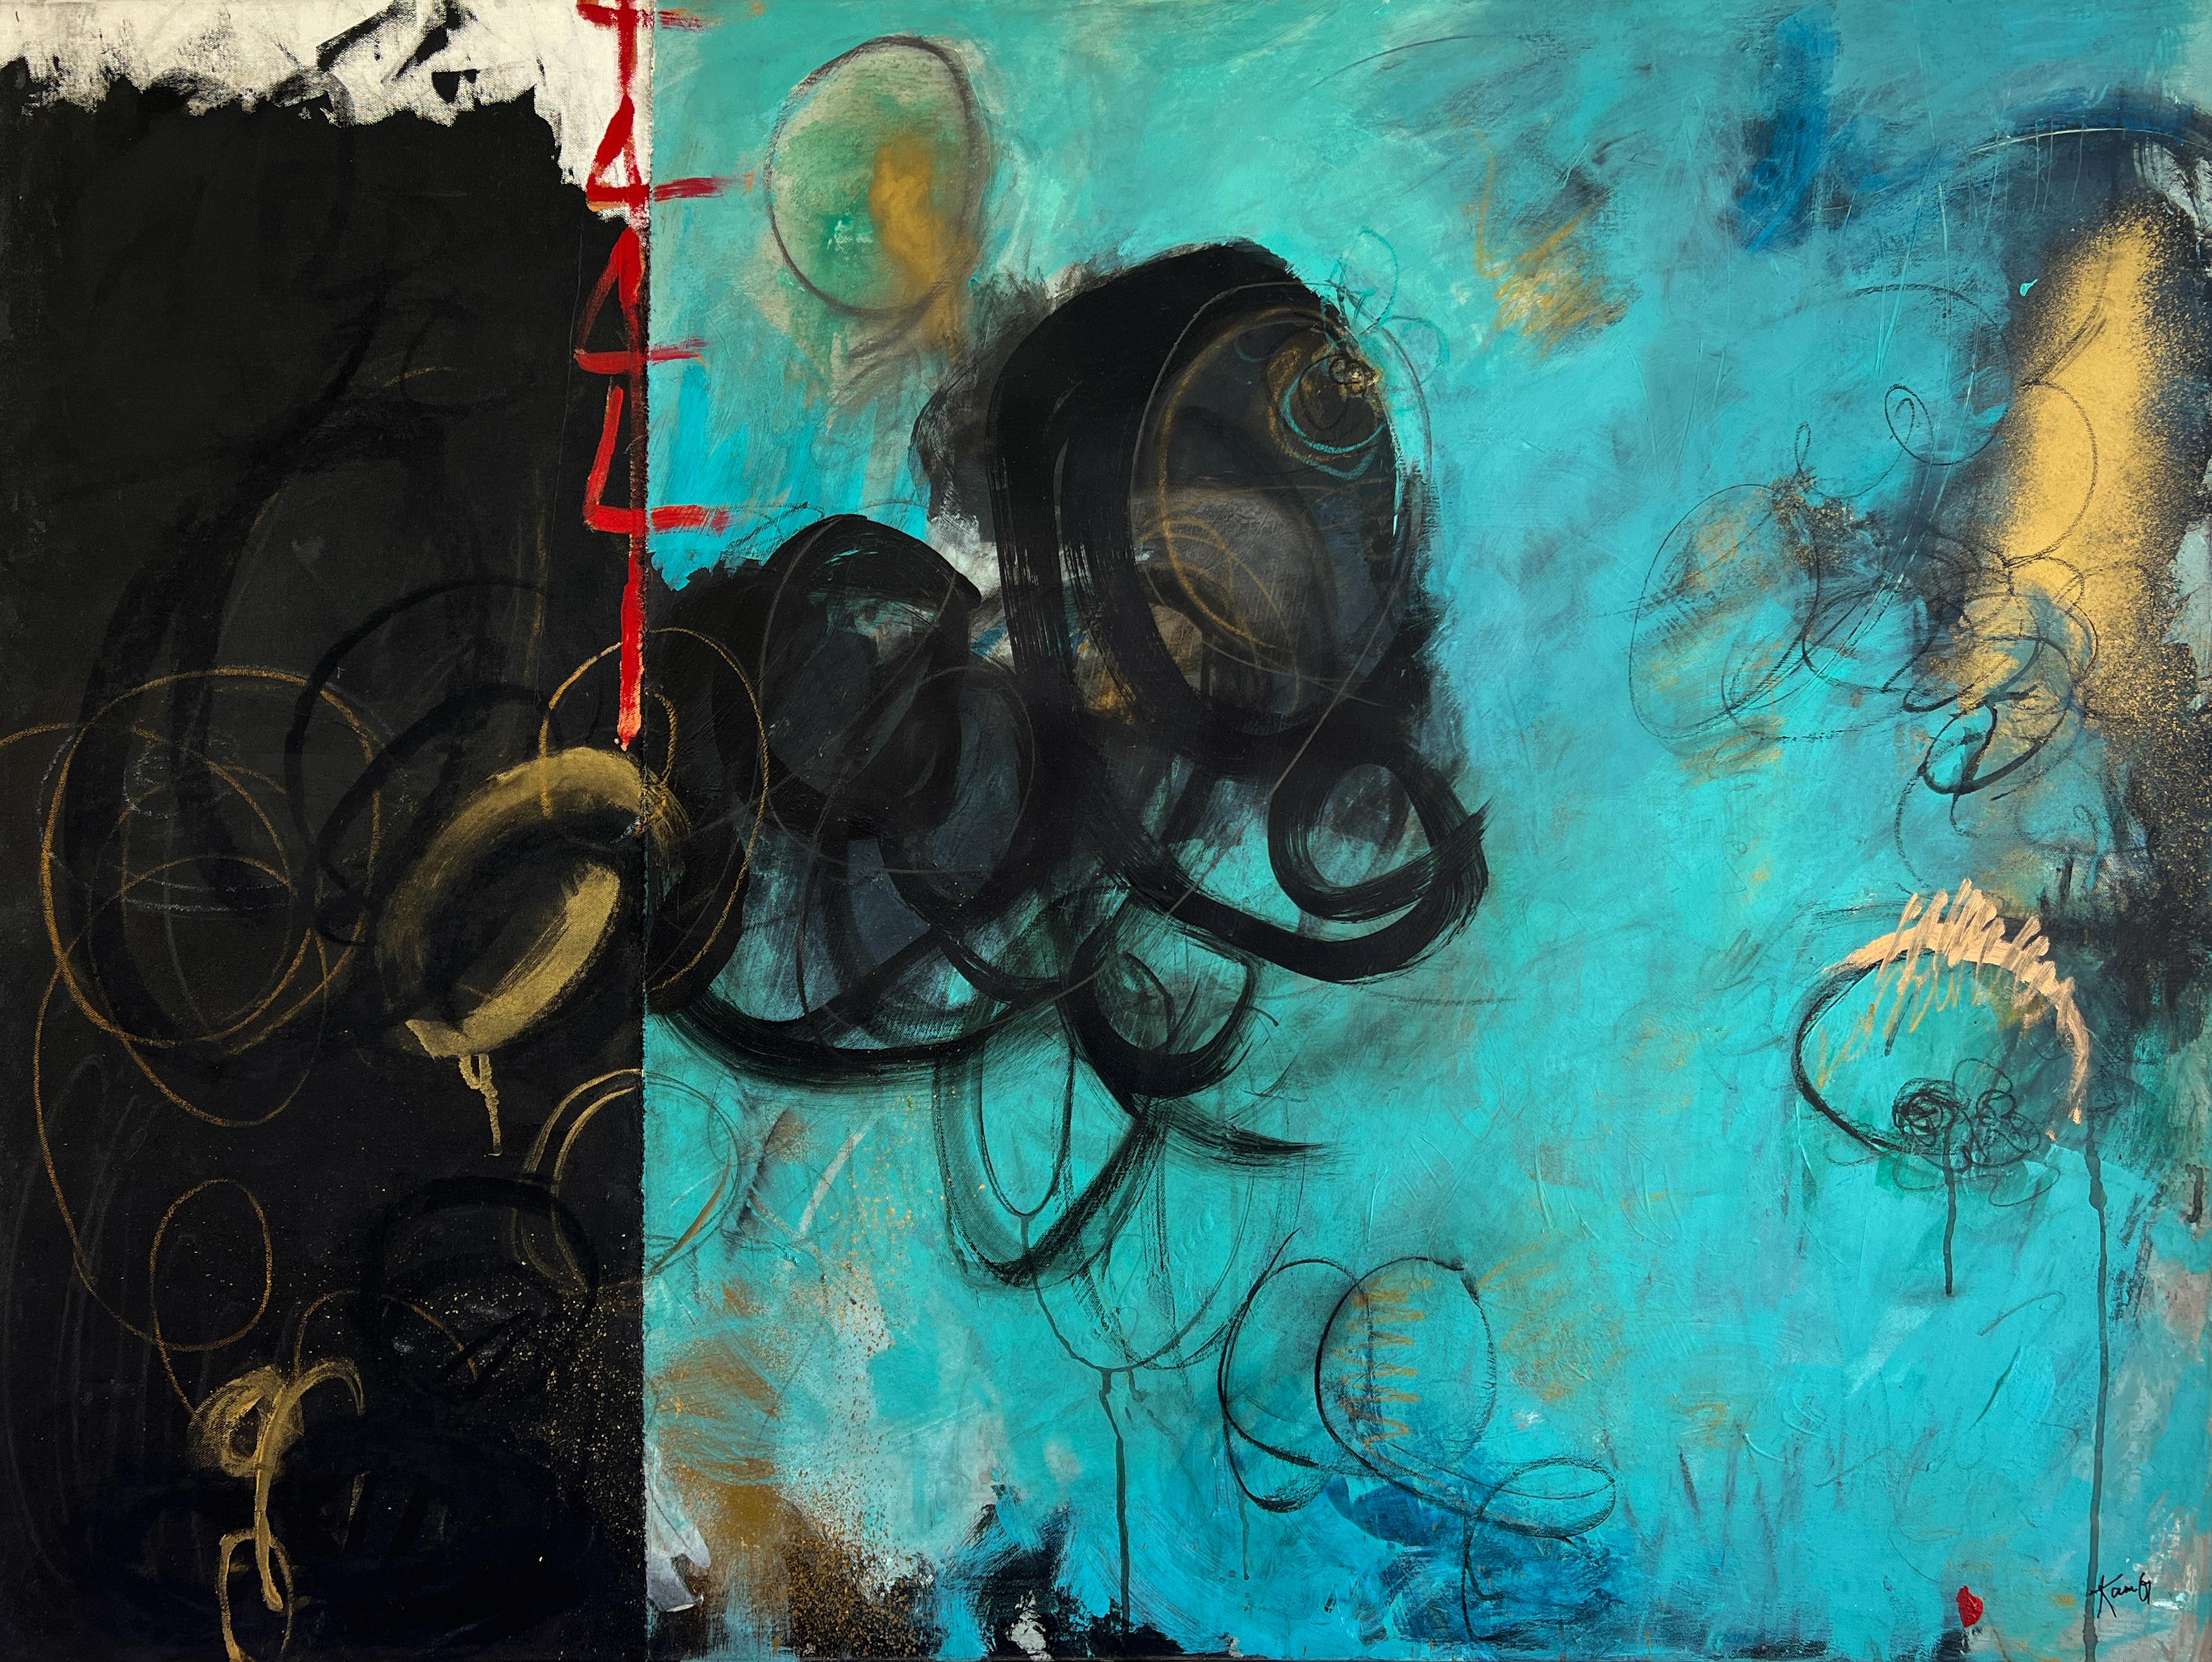 Kara Greenwell Abstract Painting - "Running Around in Circles" - Abstract Expressionist Mixed Media Painting, 2021